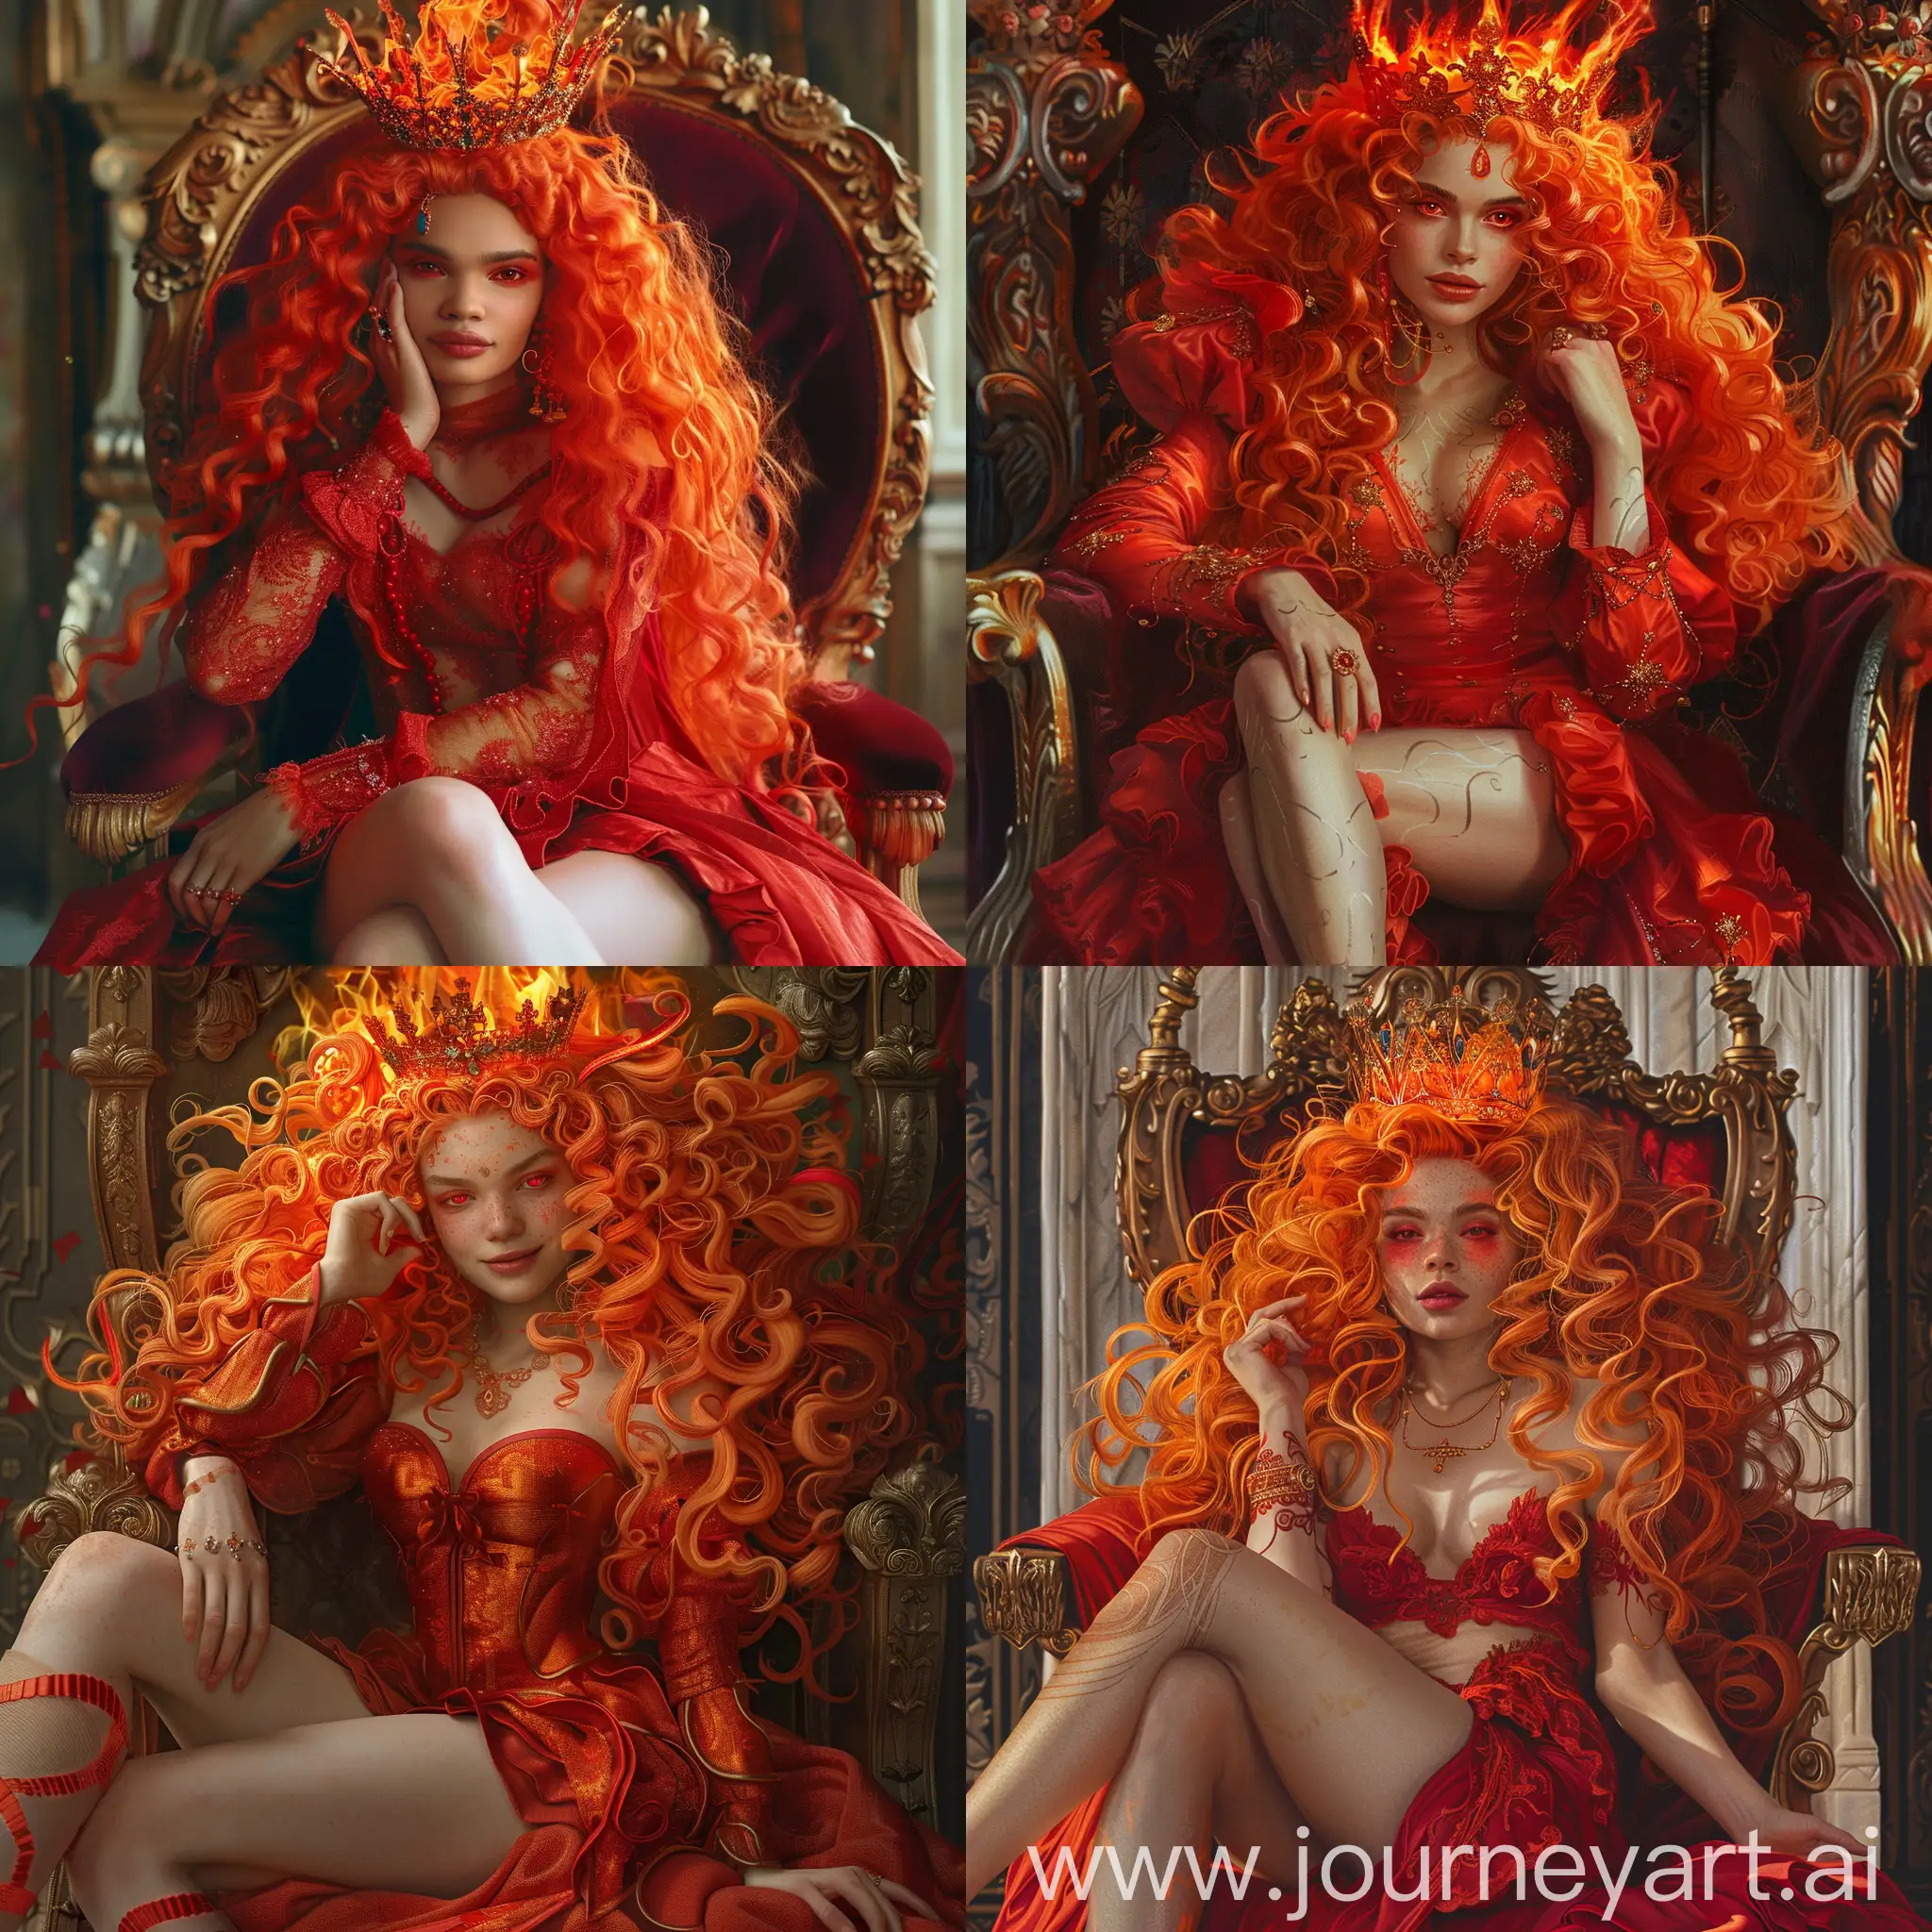 goddess of fire with long curly bright red hair gradually turning into bright orange, red eyes, tanned skin, beautiful red royal dress in the style of the 19th century. on his head there is a fiery crown, curvaceous, sitting on the royal throne with his legs crossed and his cheek resting on his hand